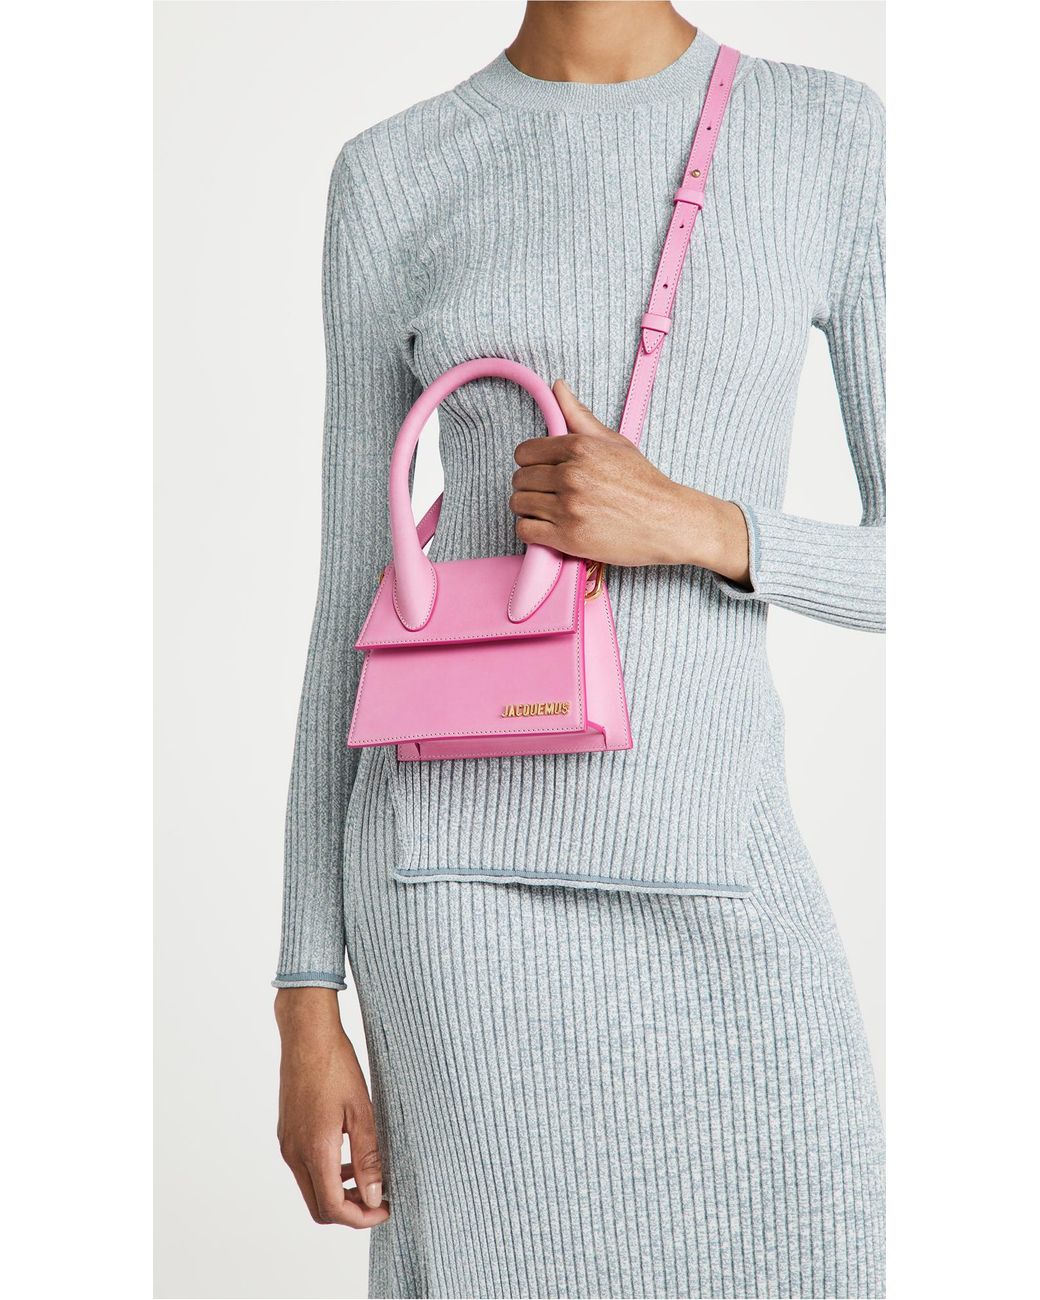 Jacquemus Le Chiquito Moyen Bag in Pink | Lyst